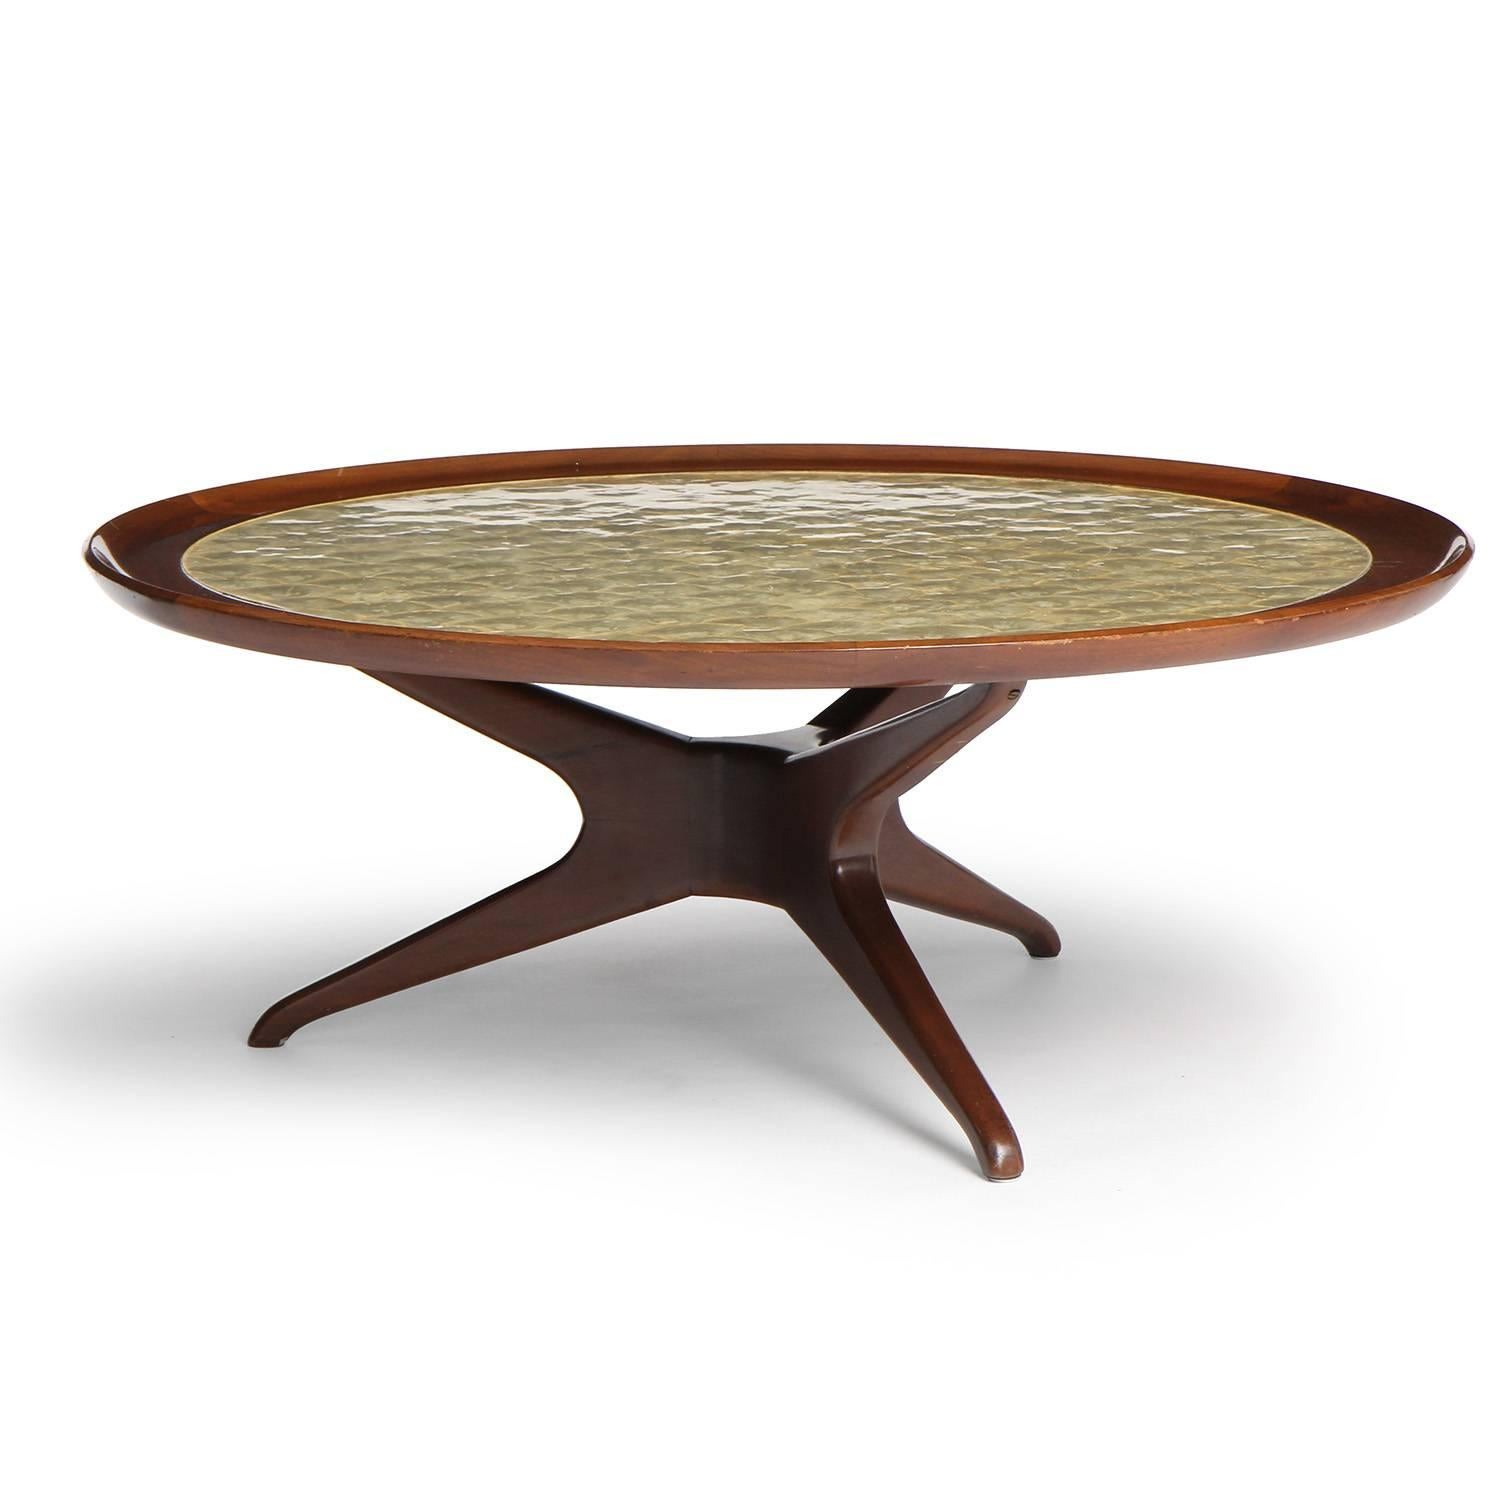 An impressive walnut low round table having a sculptural three-legged base supporting a floating top masterfully surfaced with inset scalloped capiz shells.  